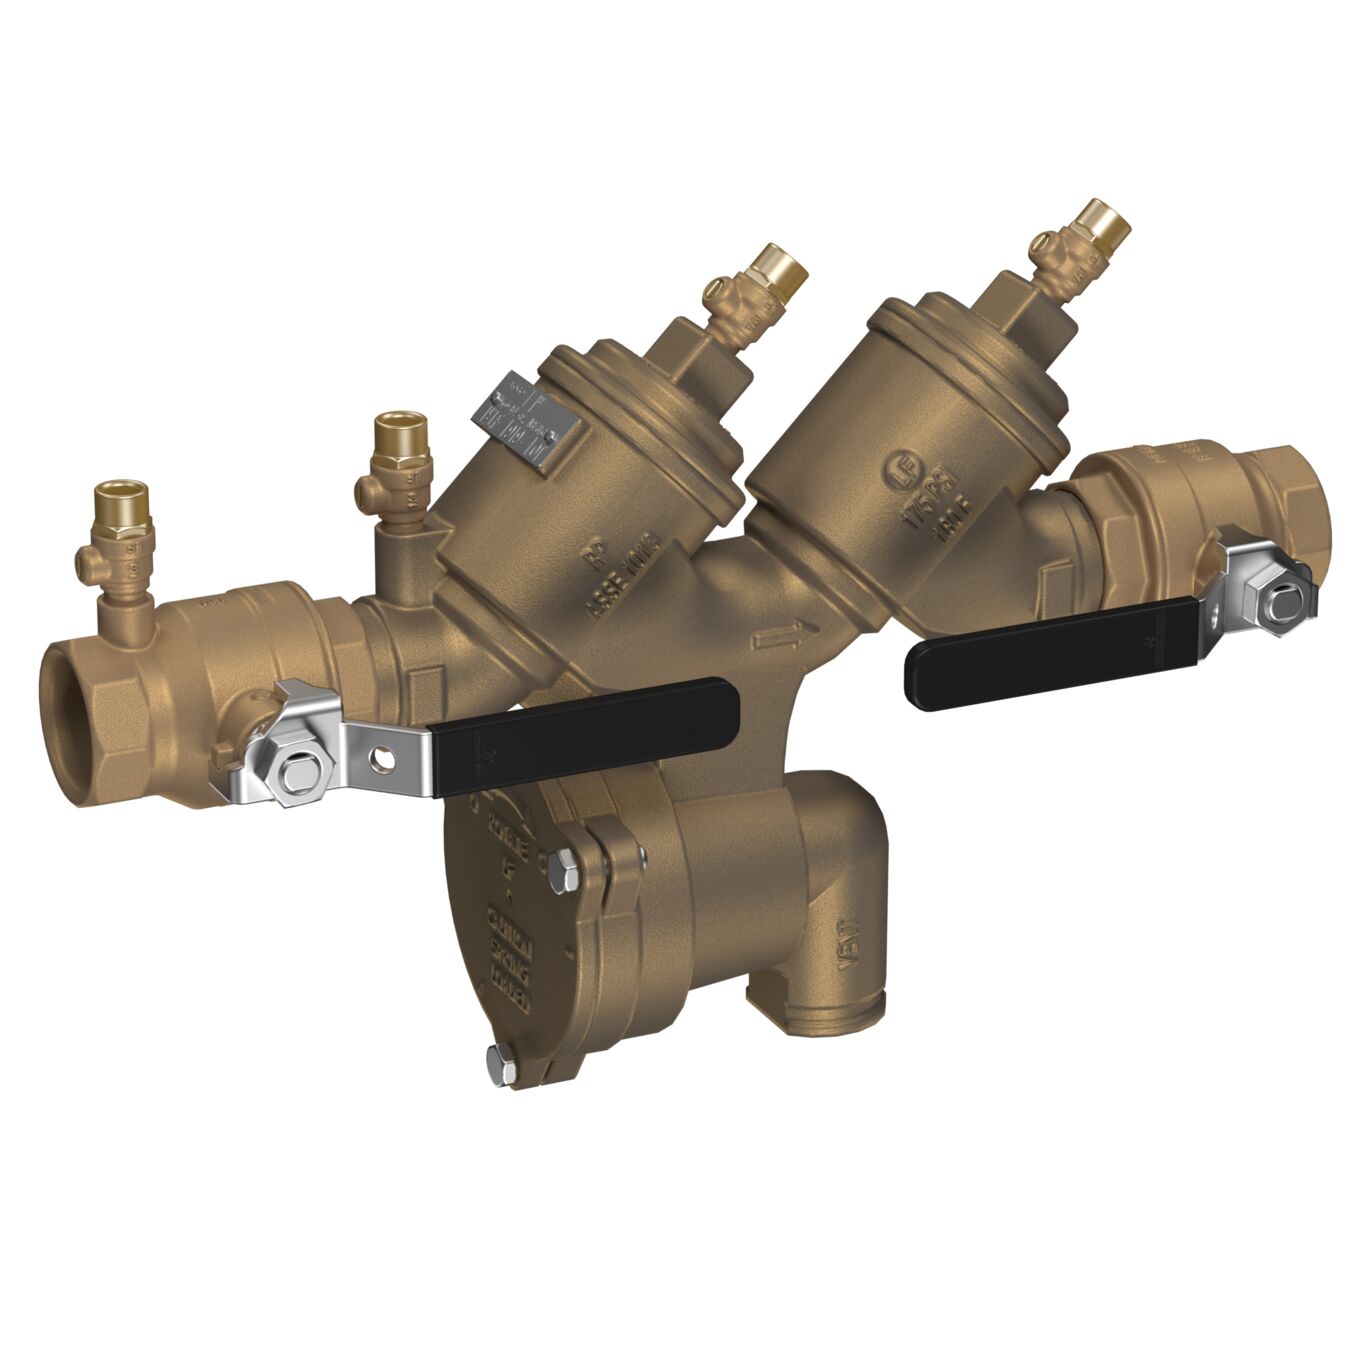 Product image - 919 Reduced Pressure Zone Backflow preventer Assembly, Quarter Turn Ball Valves, Lever Handle